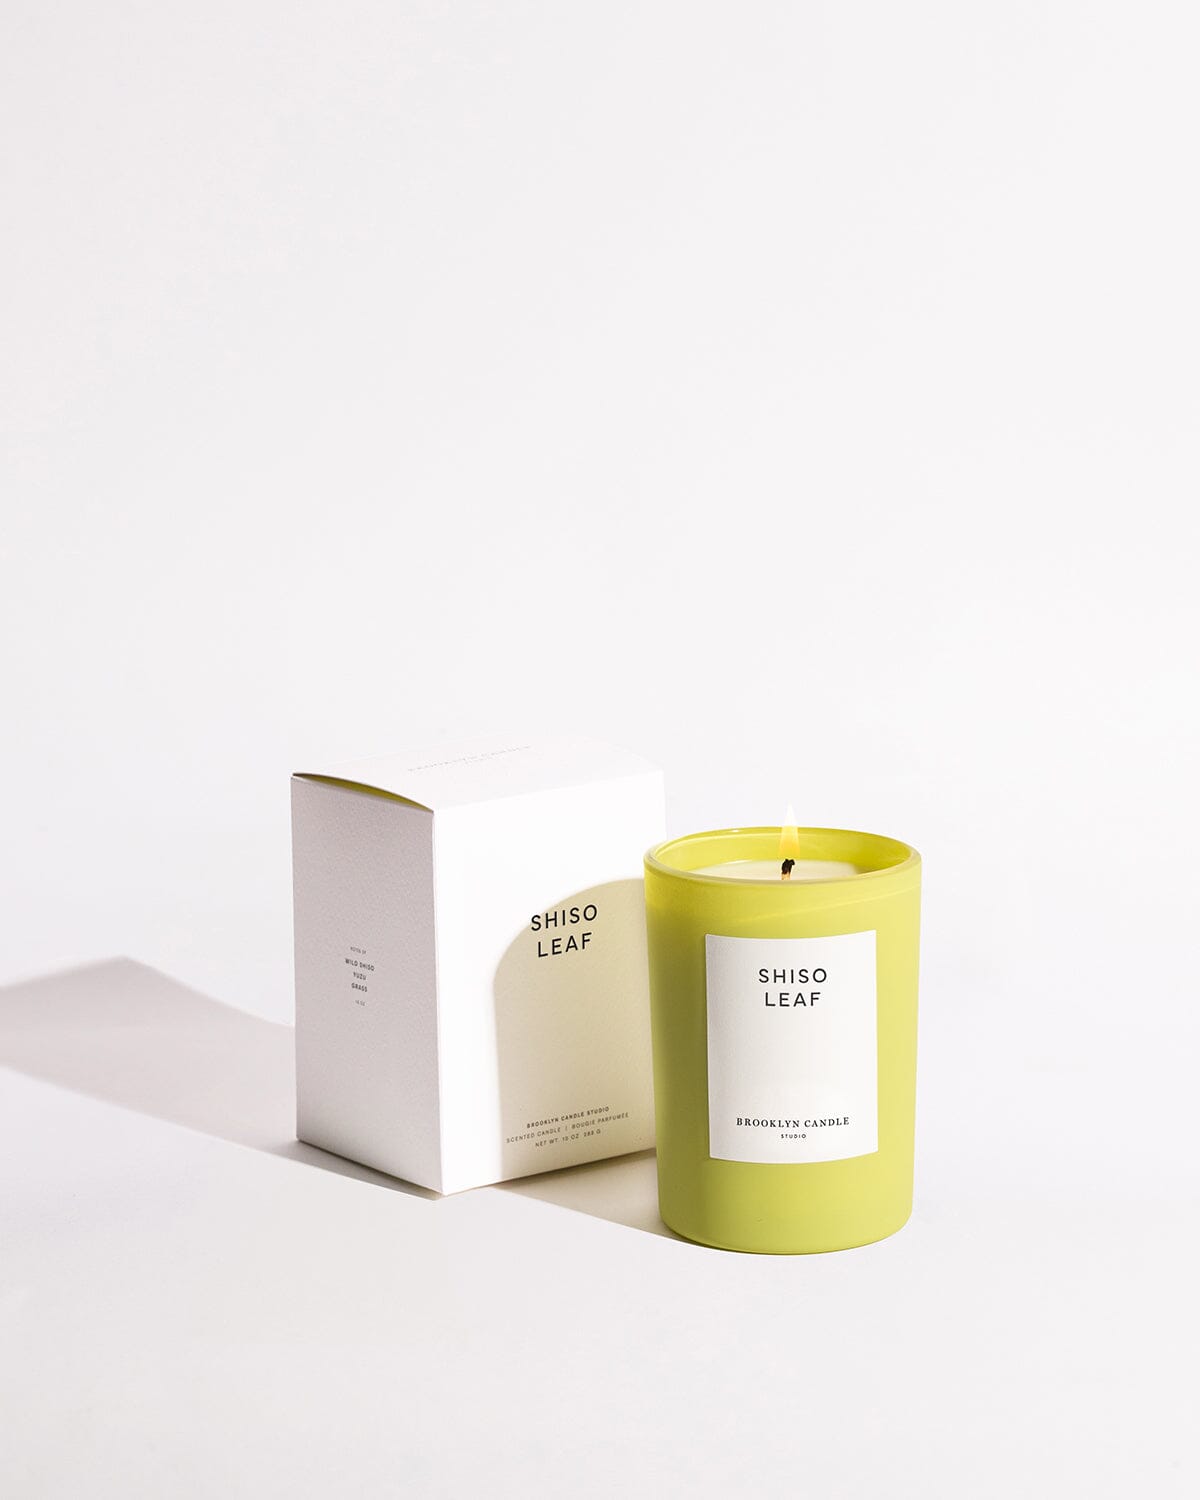 Shiso Leaf Summer Edition Candle Herbarium Collection Brooklyn Candle Studio 